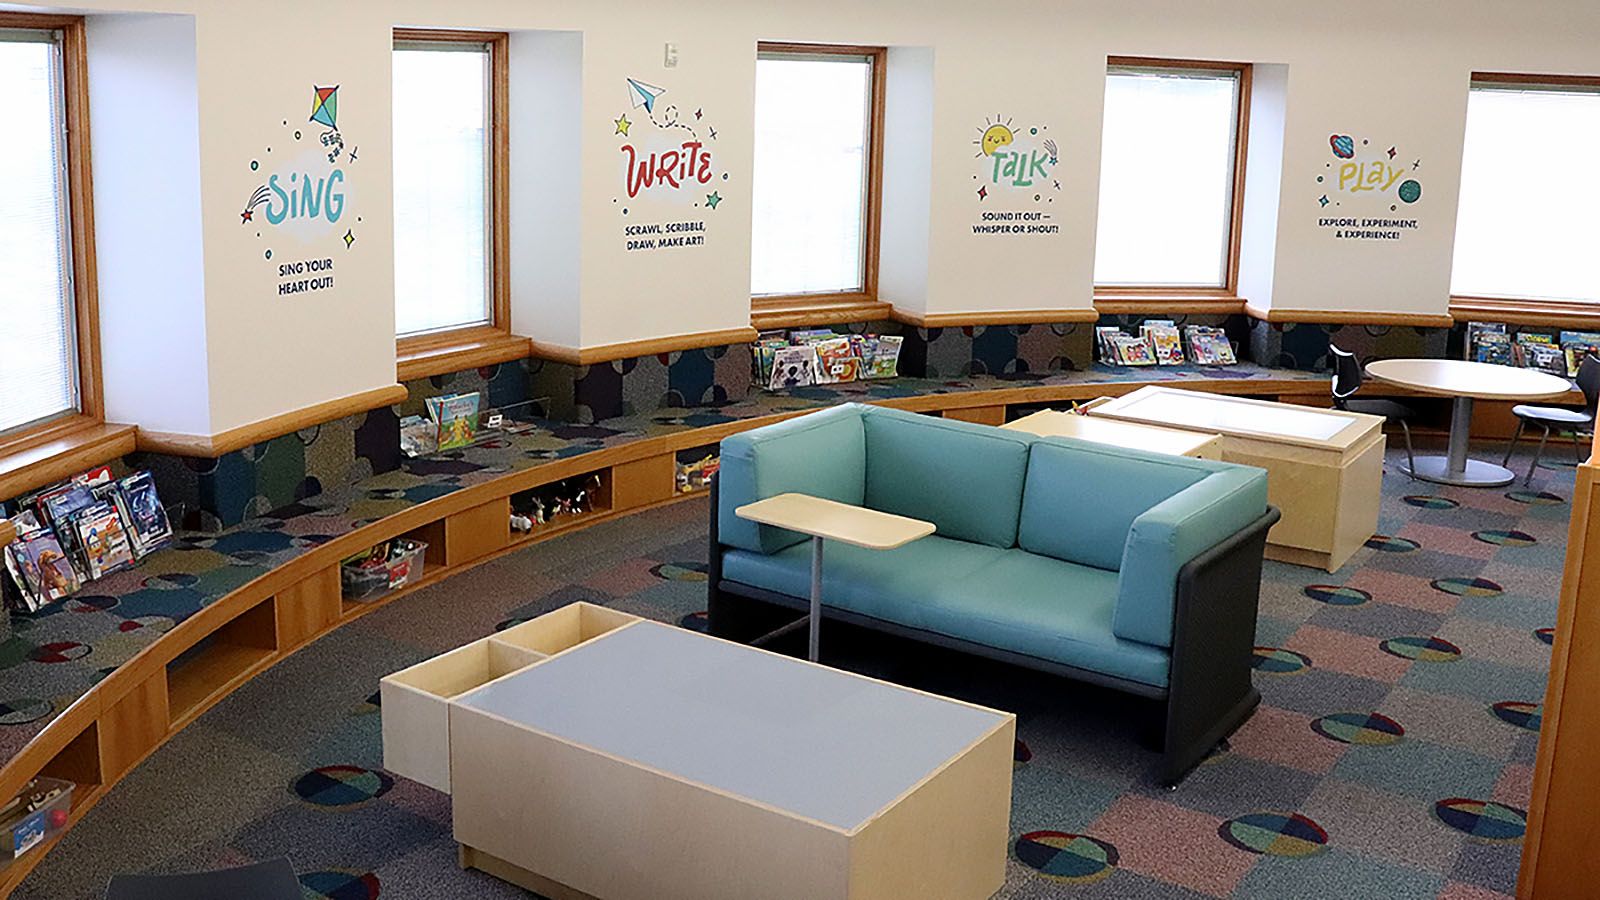 A StoryScape area was recently unveiled at the Woodburn branch of the Allen County Public Library.